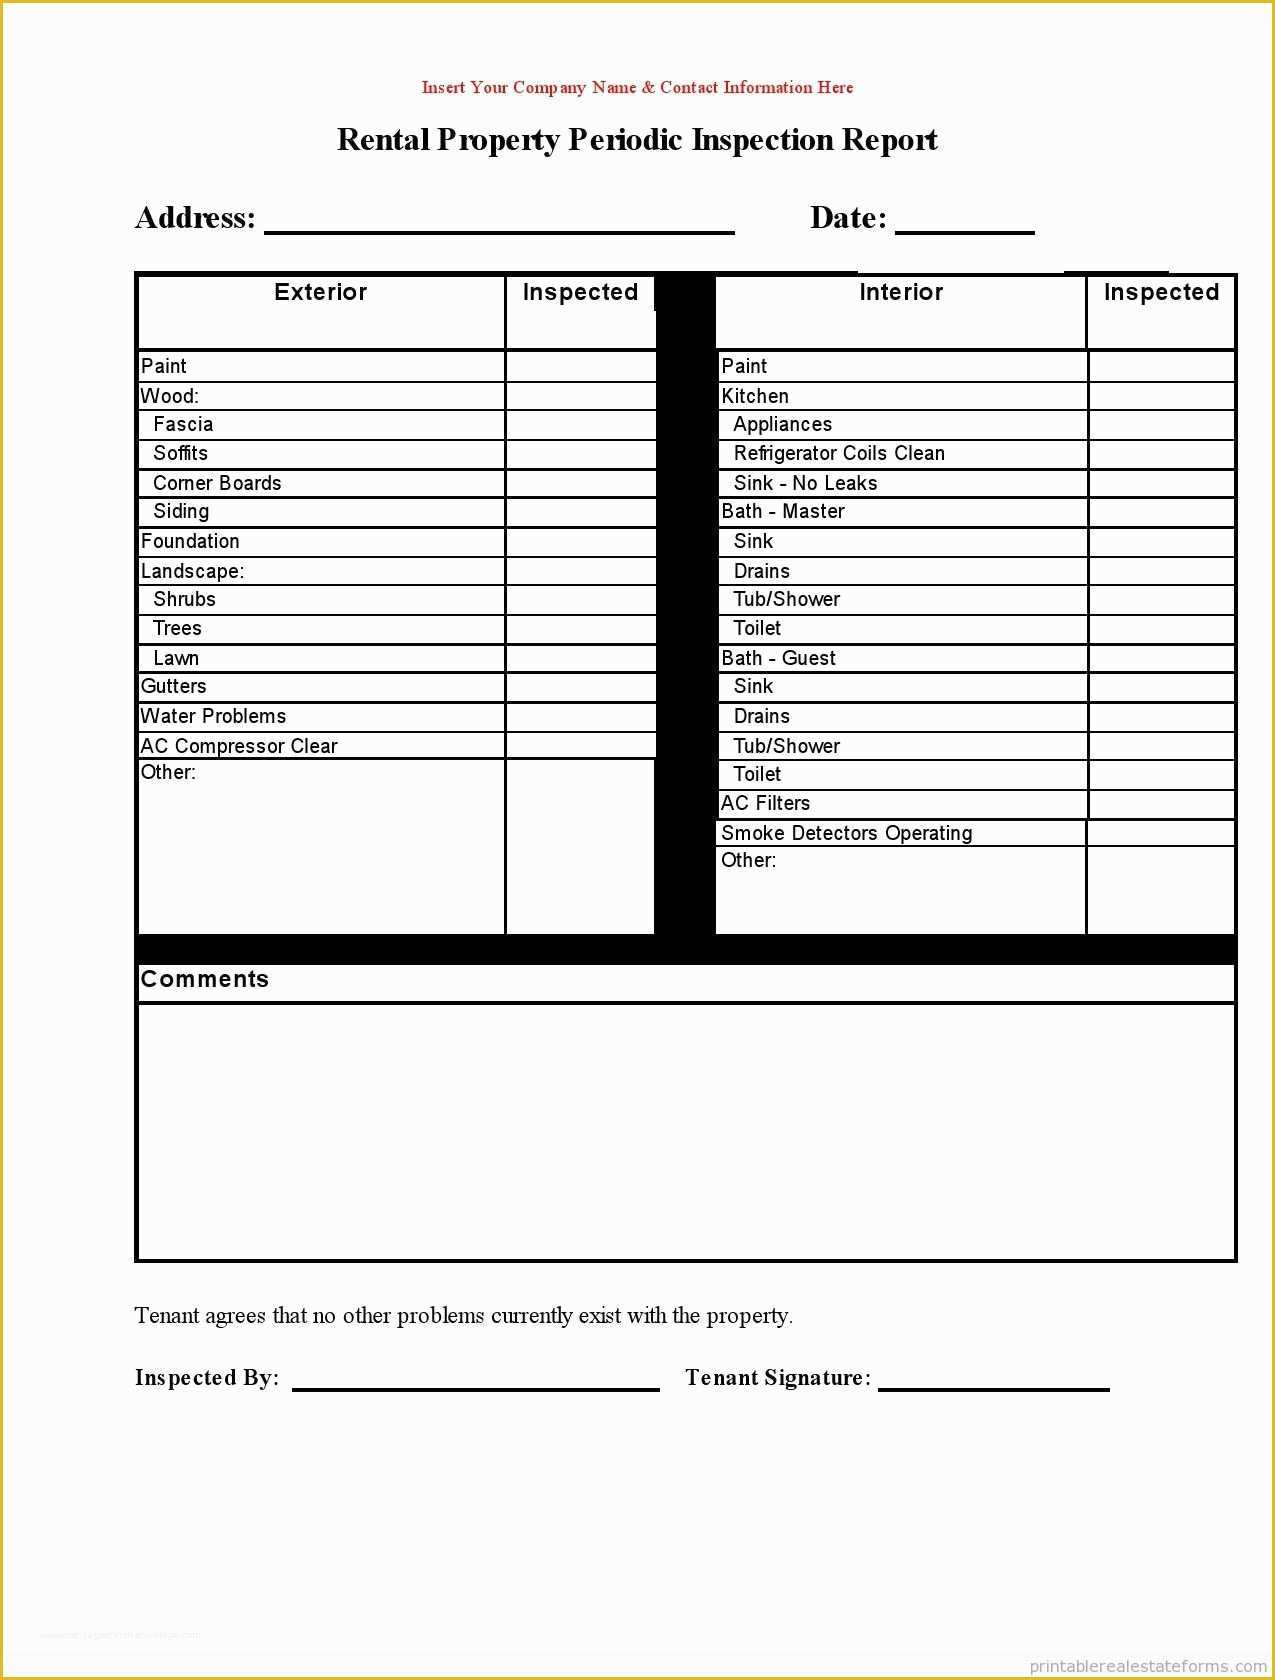 Free form Templates Of Free Printable Rental Property Periodic Inspection Report